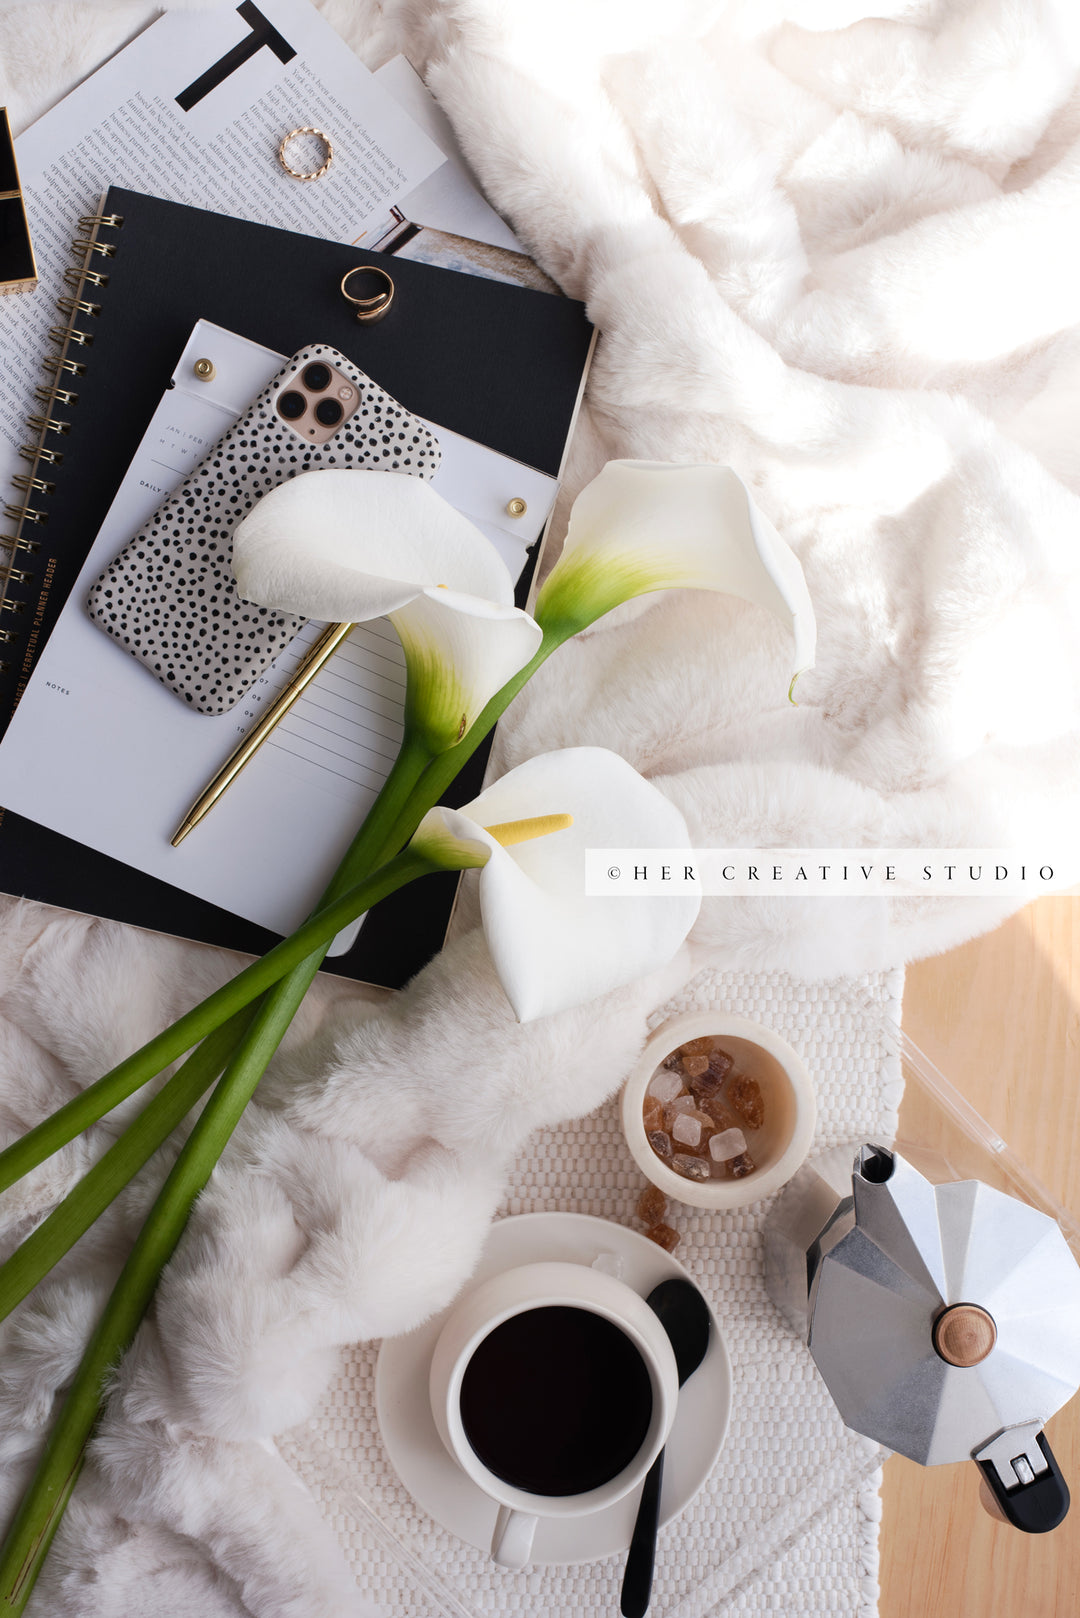 Calla Lillies and Notebooks, Stock Photo